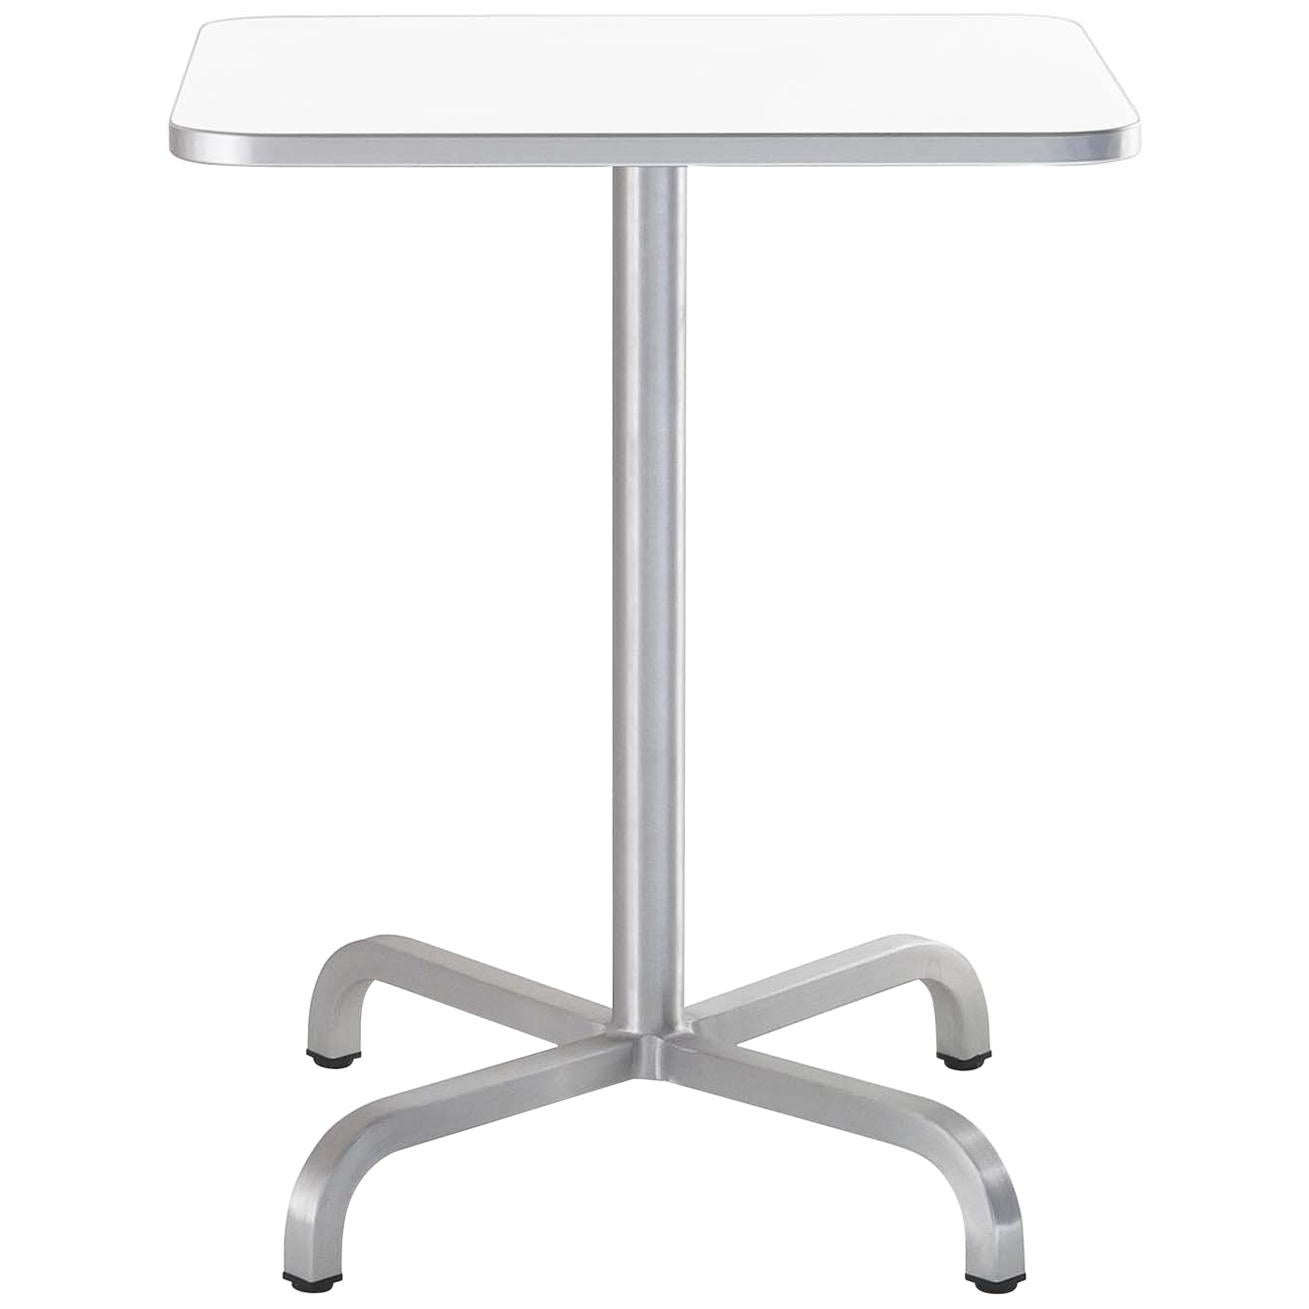 Emeco 20-06 Small Square Café Table with White Laminate Top by Norman Foster For Sale